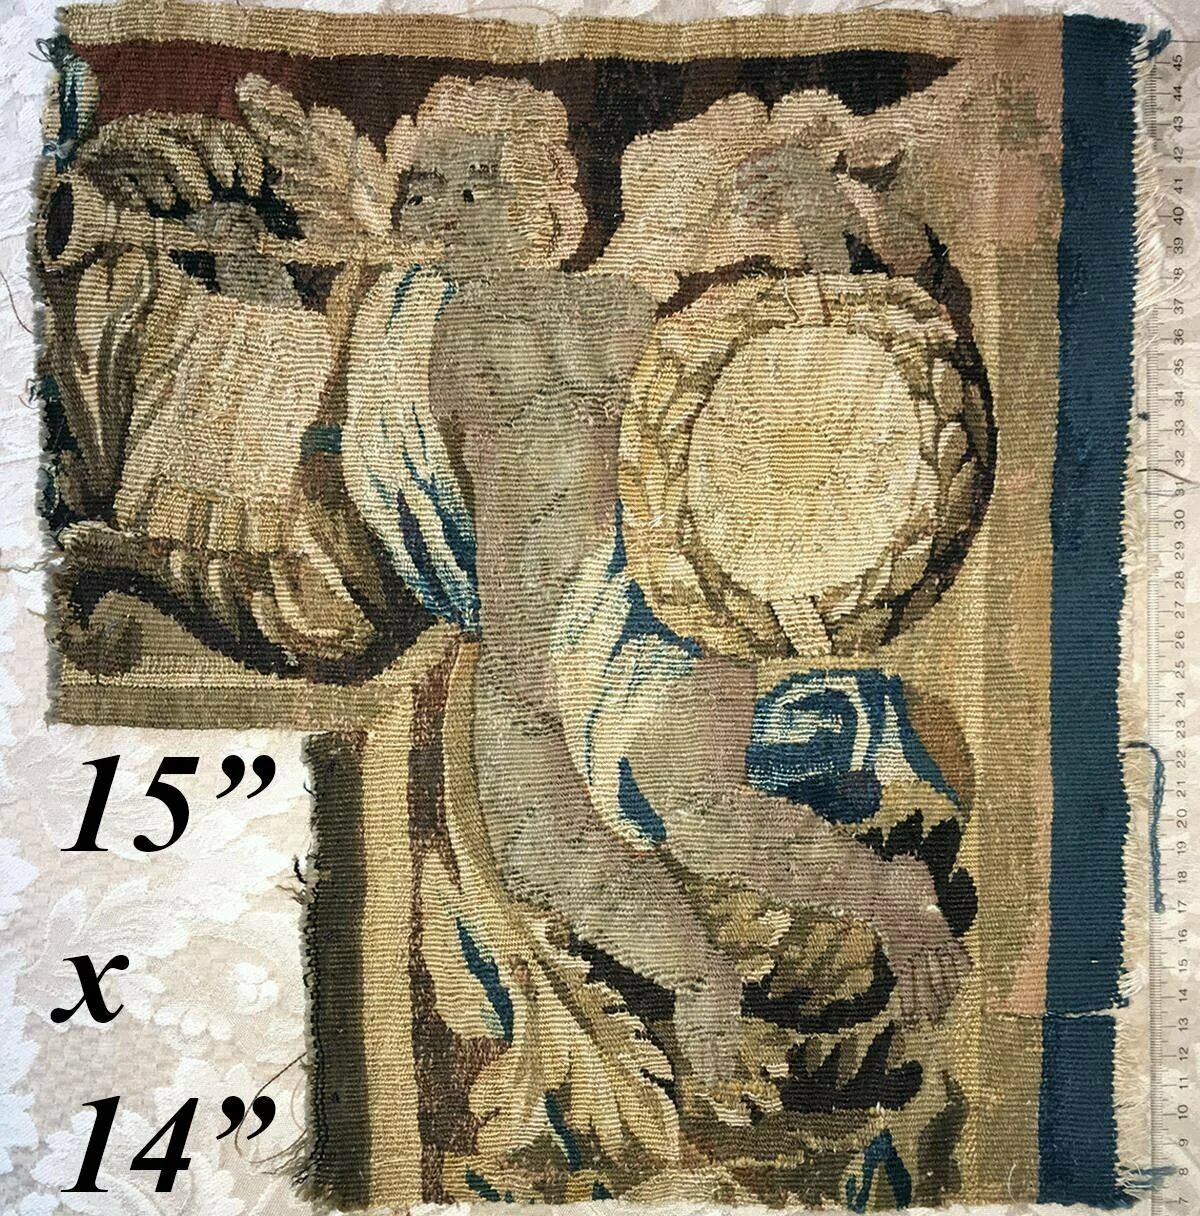 Antique c.1700s French Gobelin Tapestry Fragment, Figural, Putti, 15" x 14"